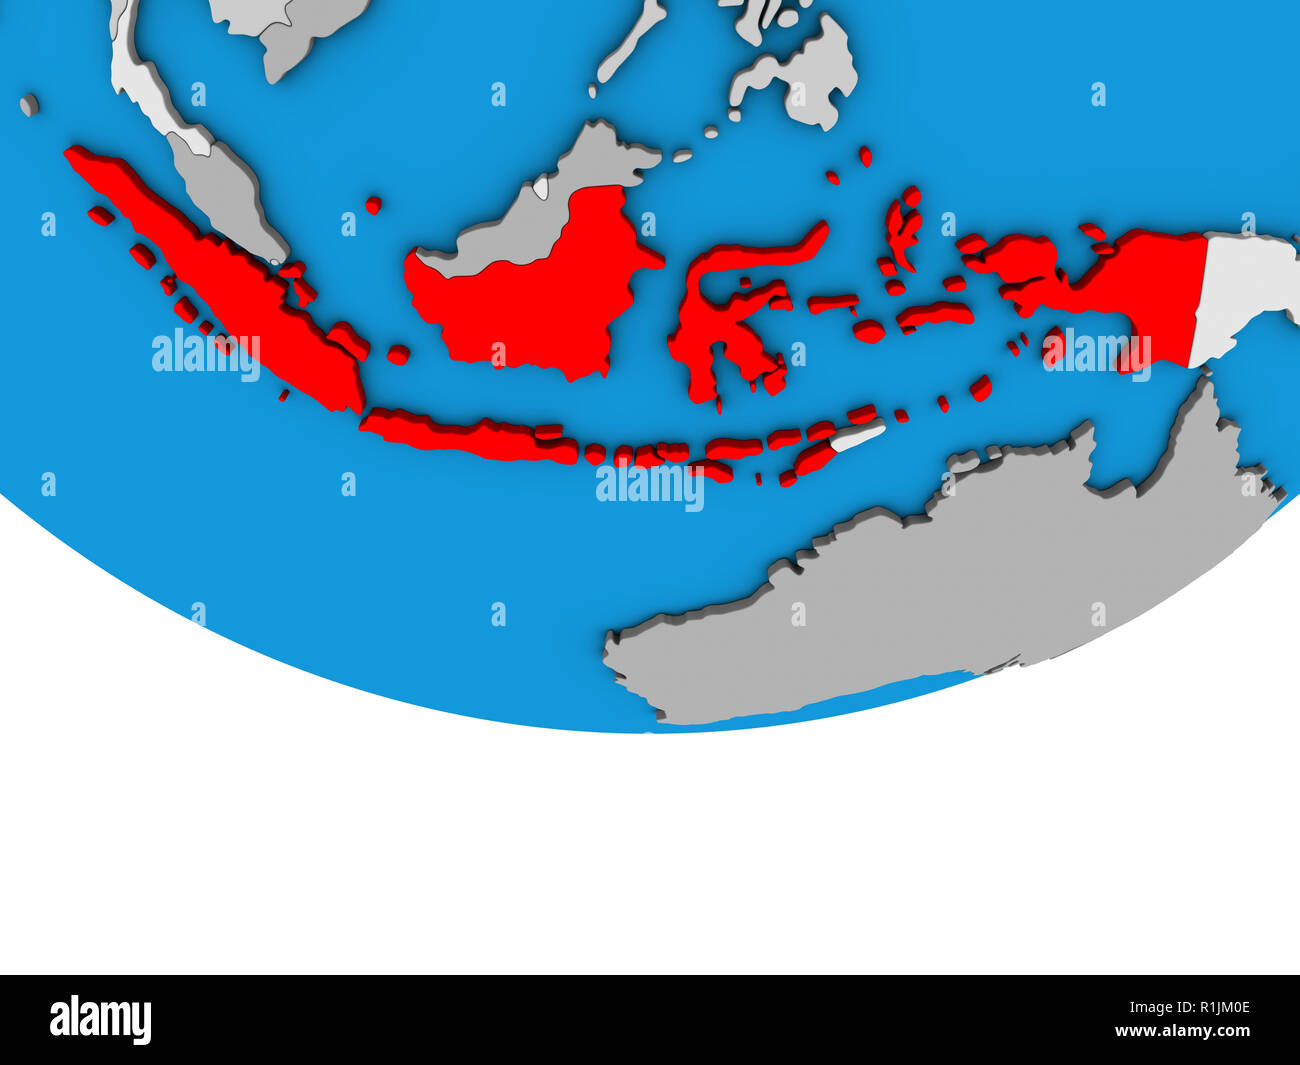 Indonesia on simple political 3D globe. 3D illustration. Stock Photo